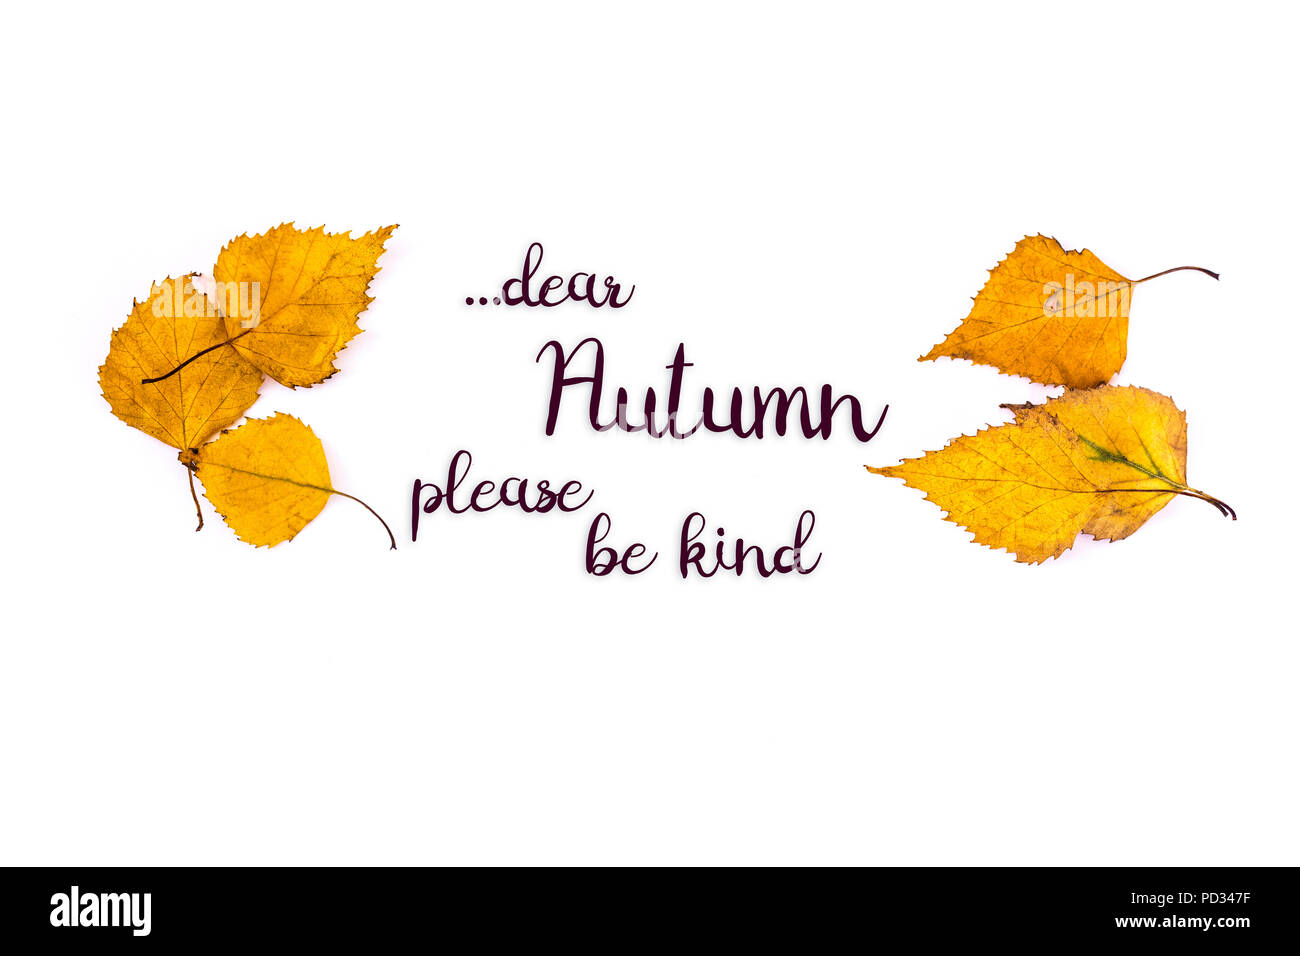 Close-up photo of a six yellow autumn leaves isolated on white background with the inscription: '...dear Autumn please be kind' Stock Photo